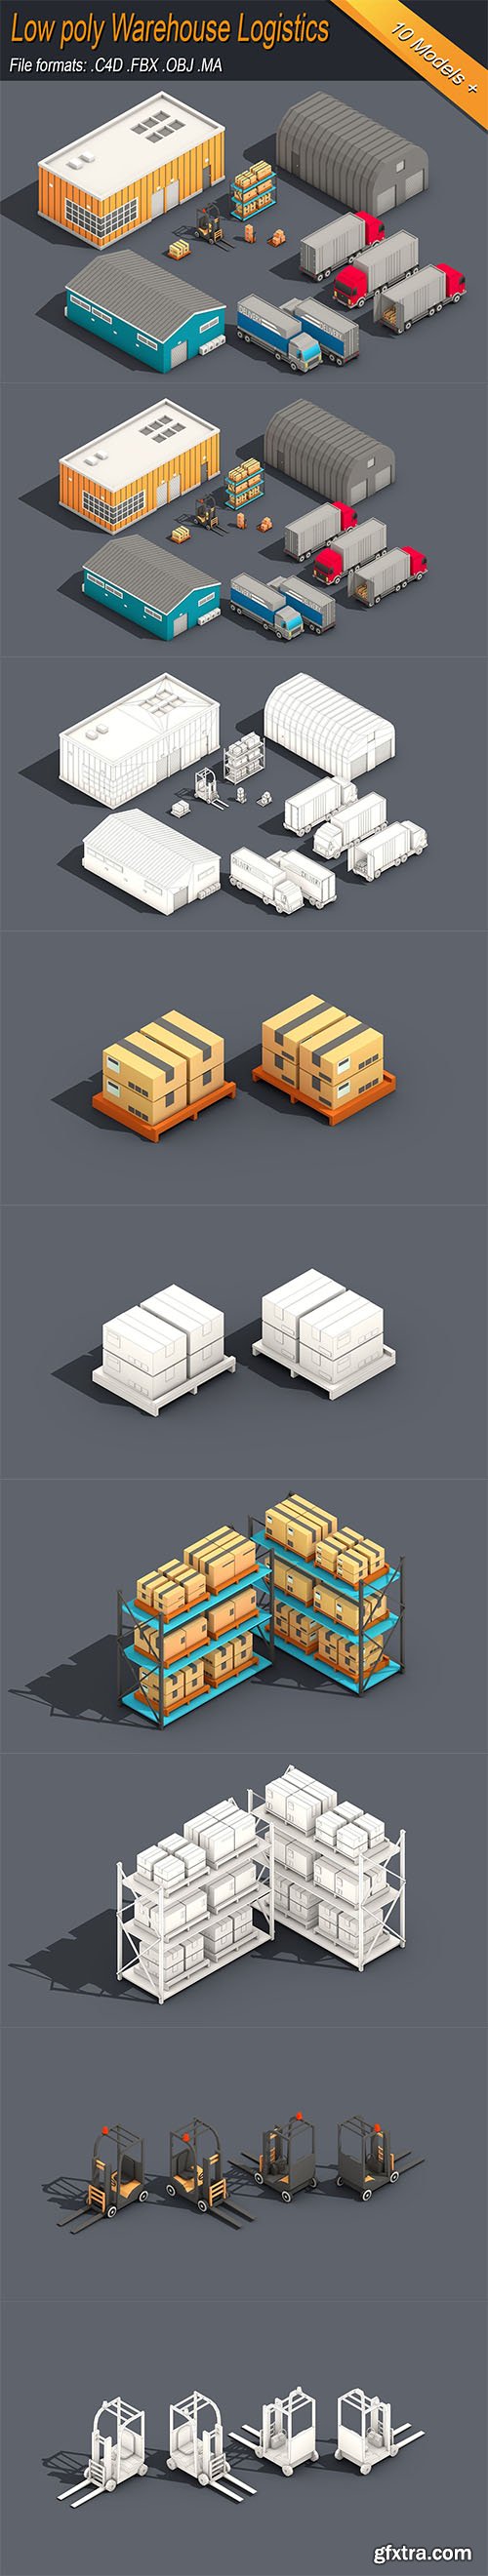 Cgtrader - Low Poly Warehouse Logistics Isometric Low-poly 3D model